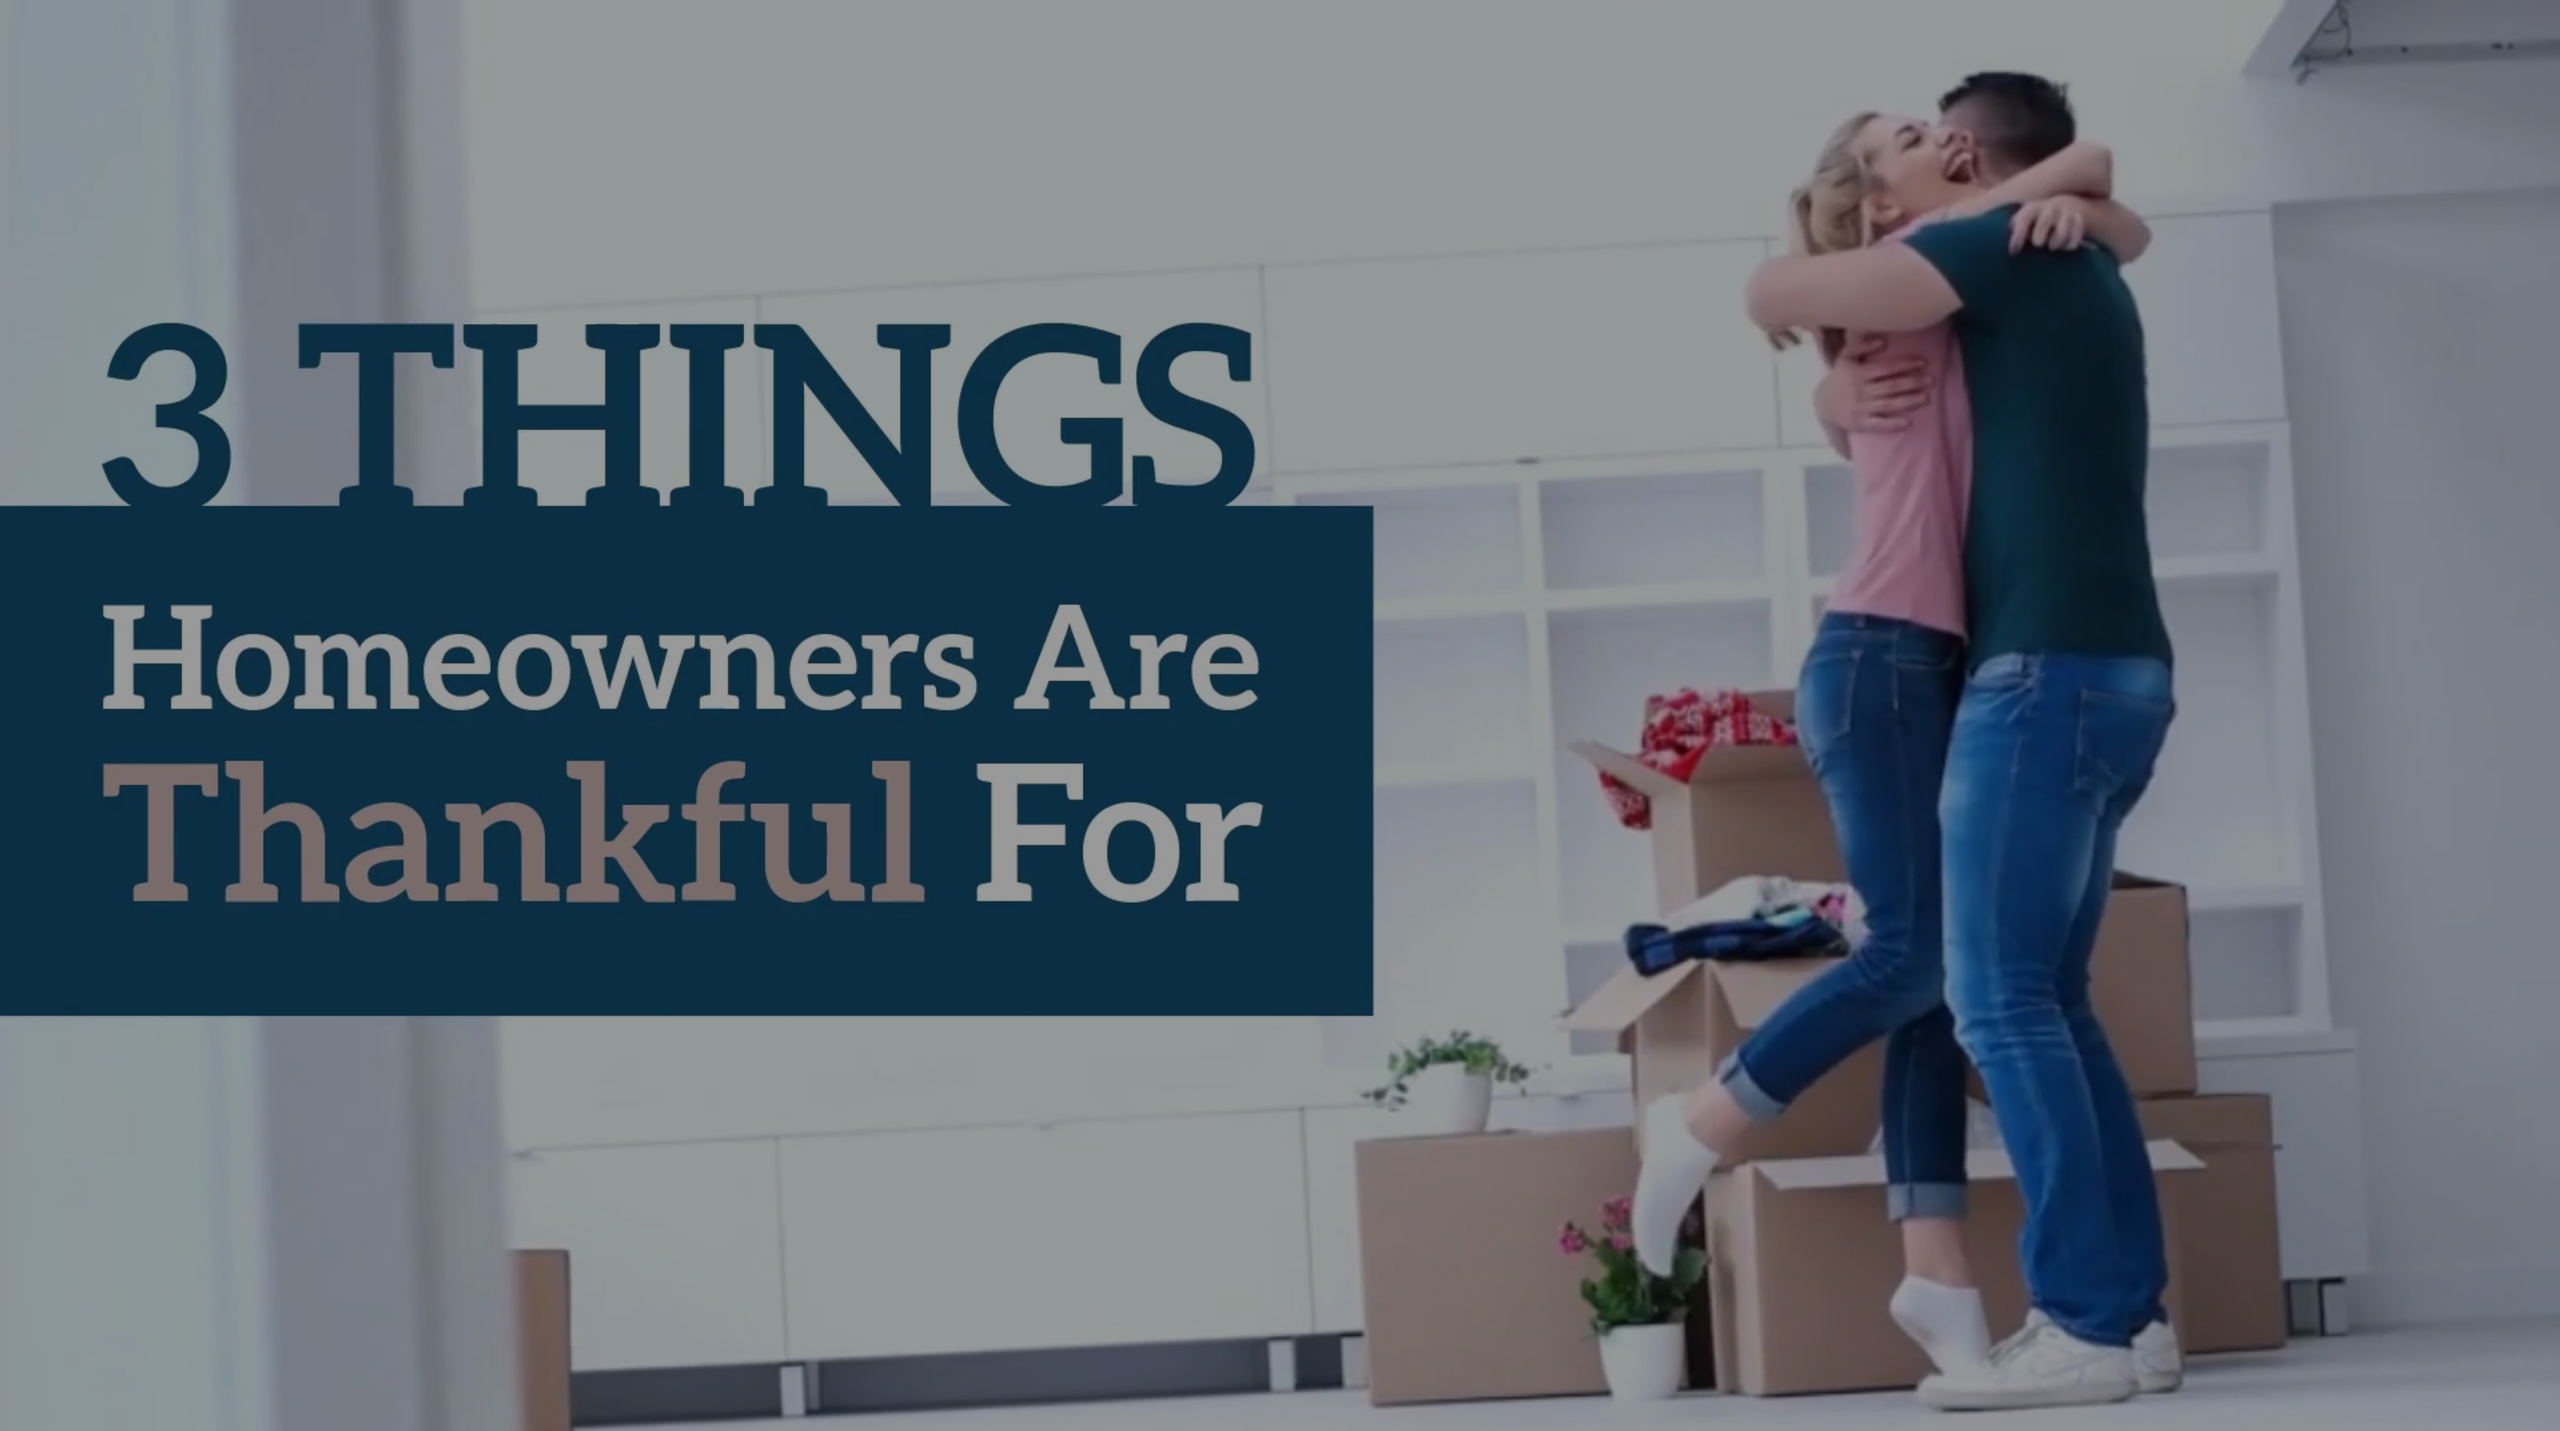 3 Things Homeowners Are Thankful For